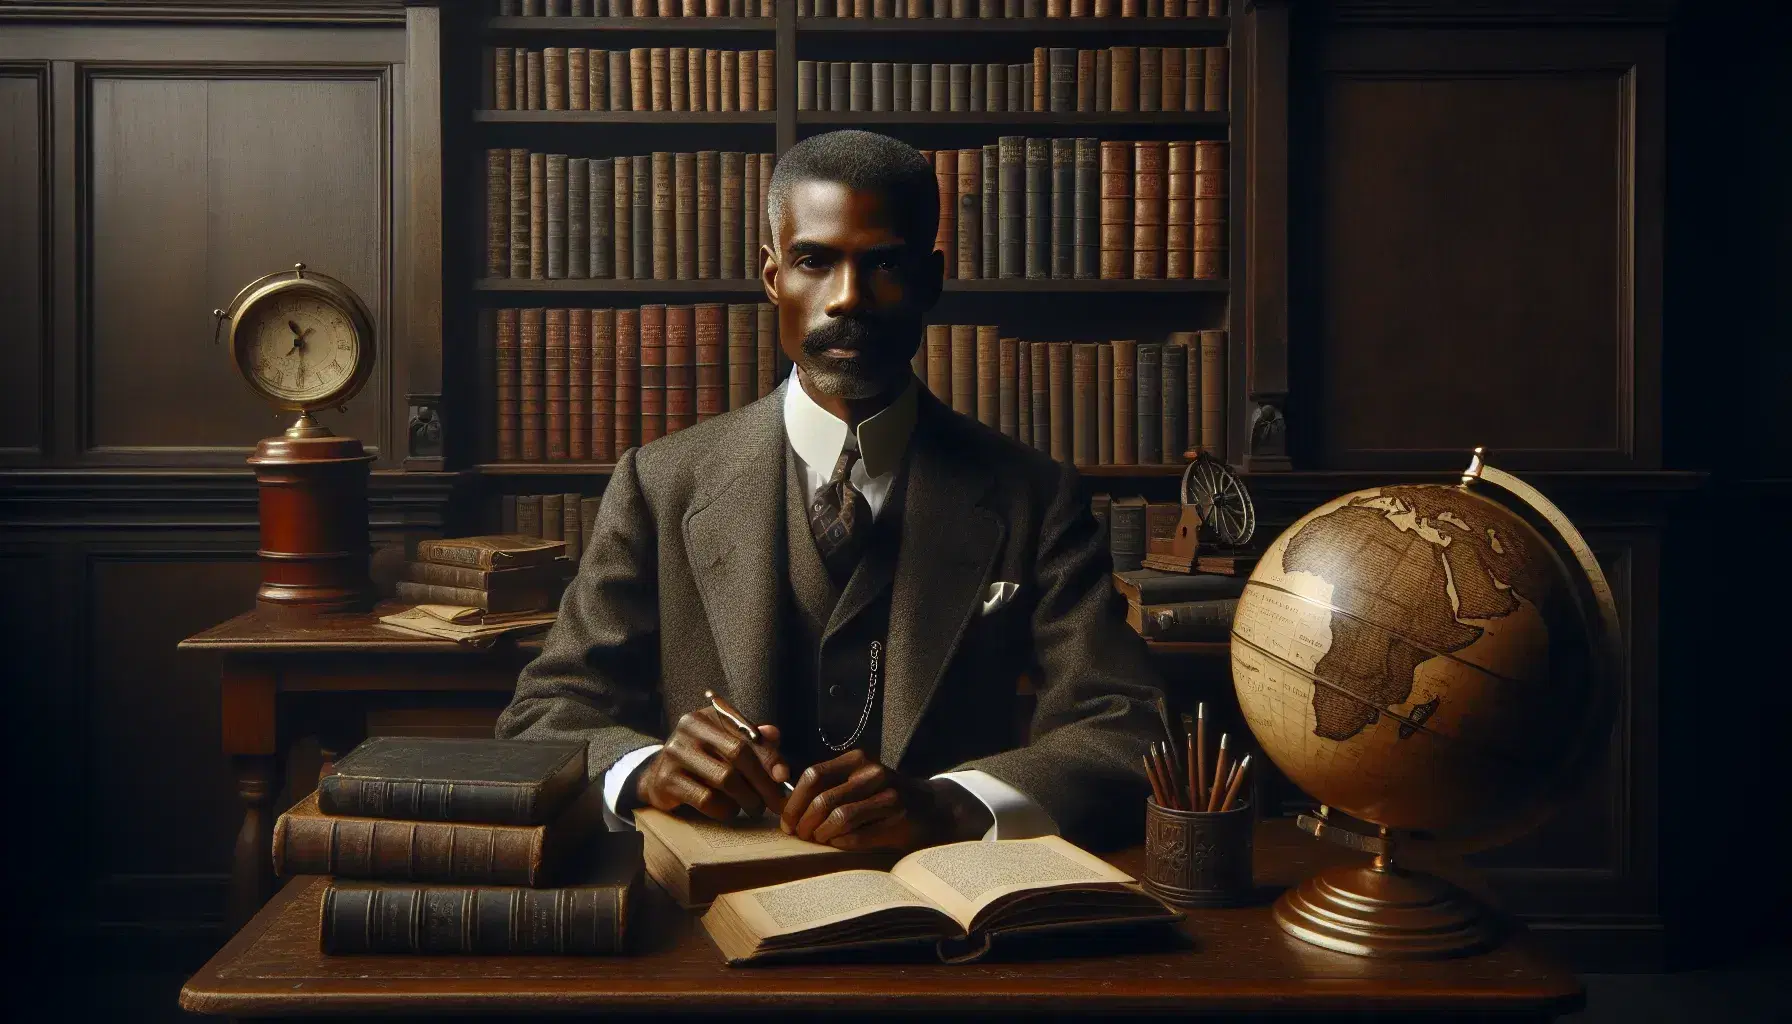 Black and white portrait of an elegant African American gentleman sitting at the desk with books and globe in the 1900s era.